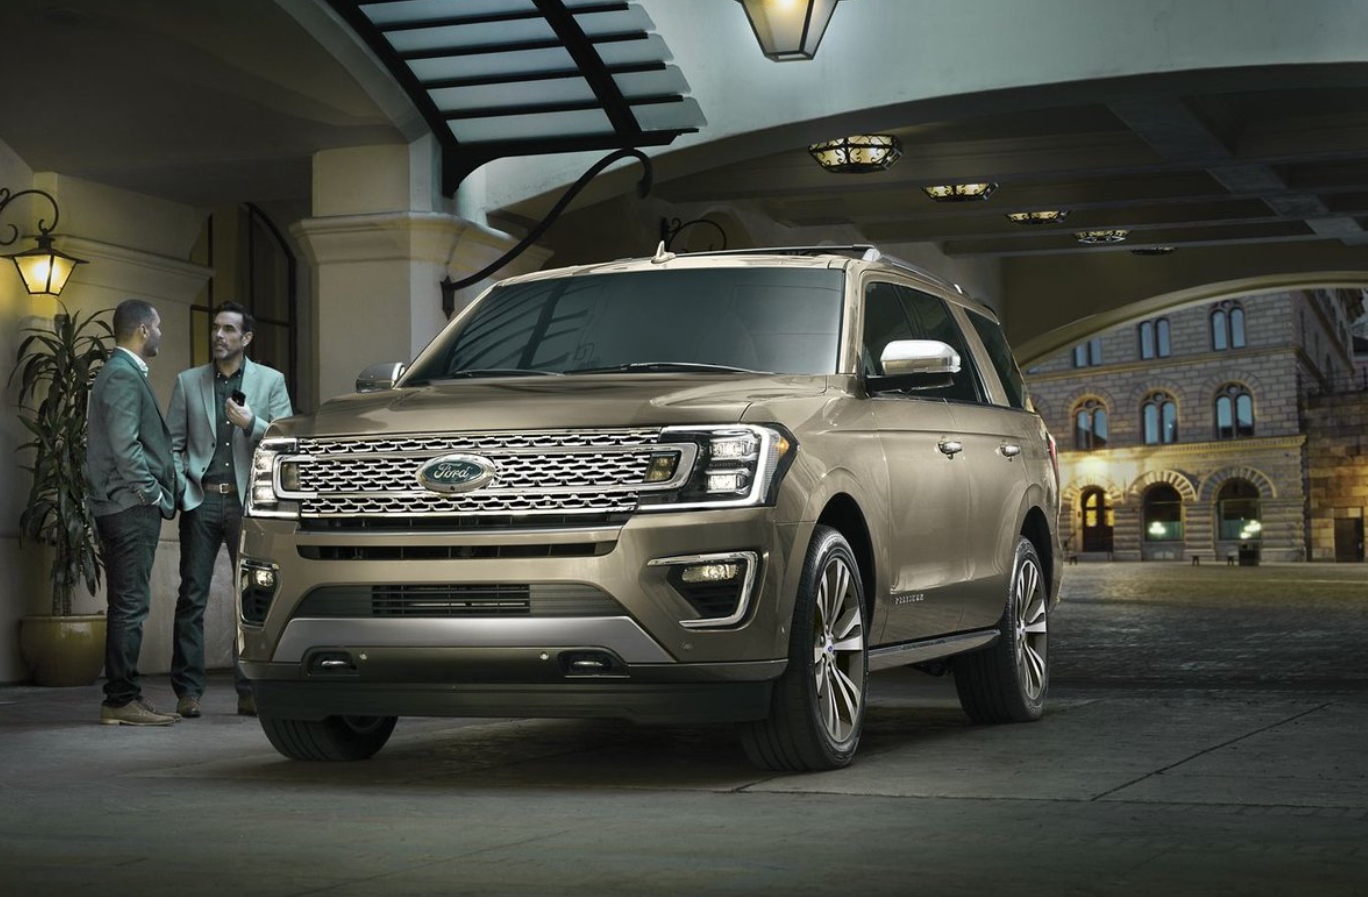 2025 Ford Expedition Redesign, Specs, Price Inside The Hood